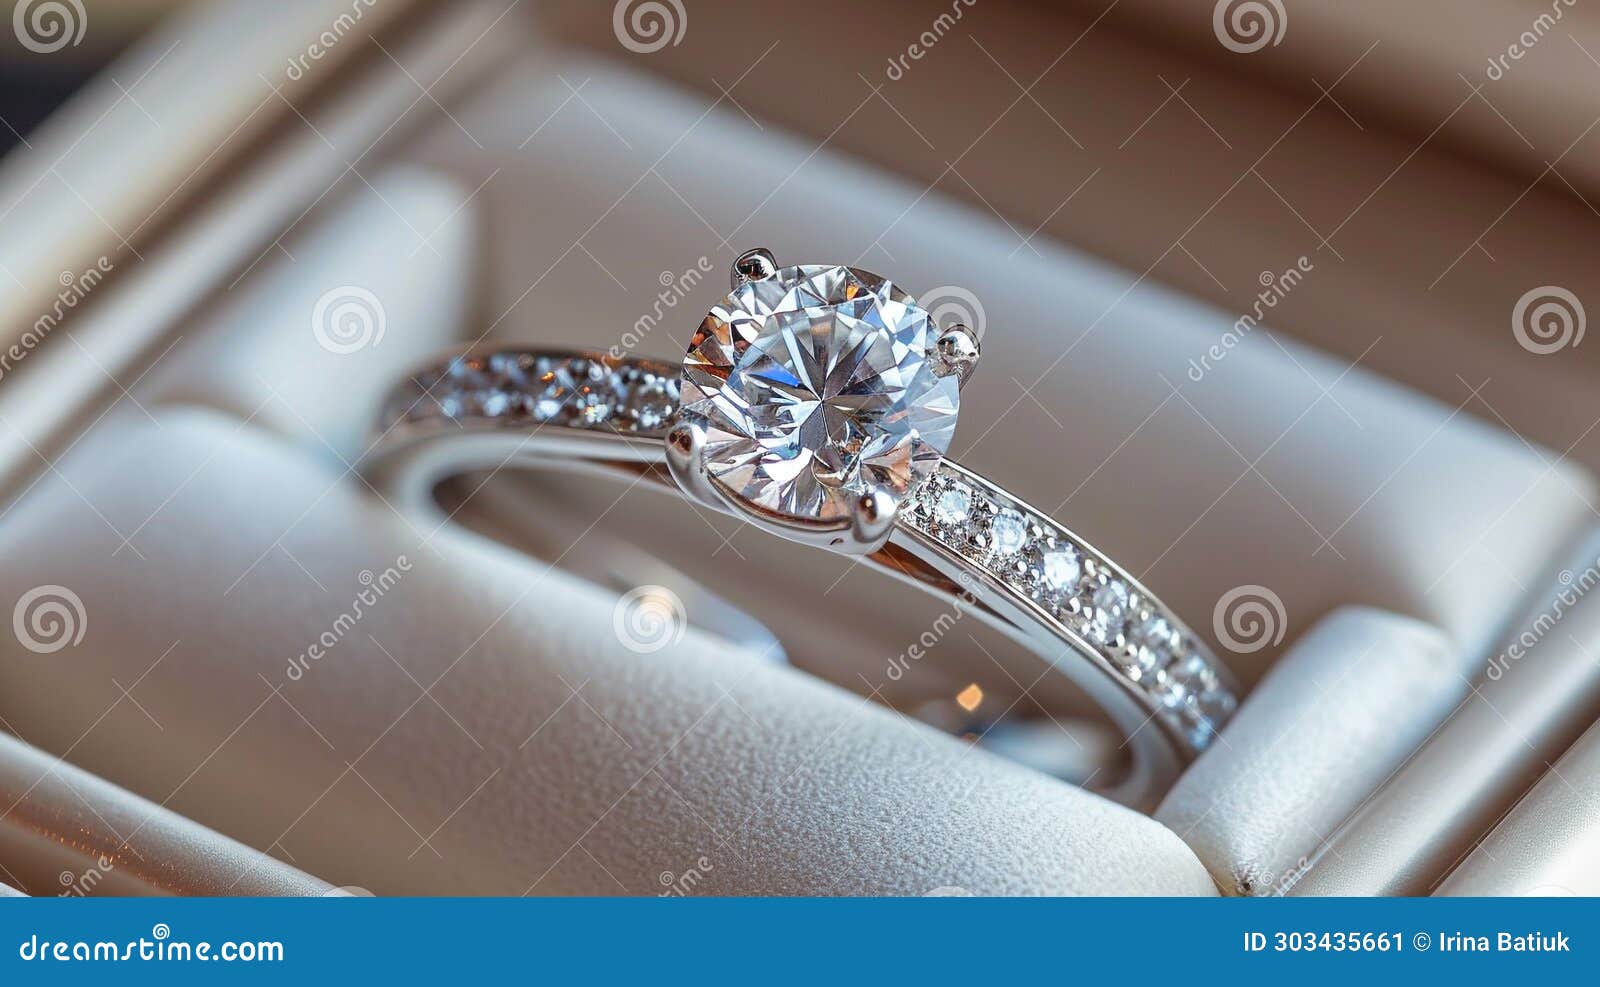 the world's most expensive engagement rings | JewelleryBox.co.uk